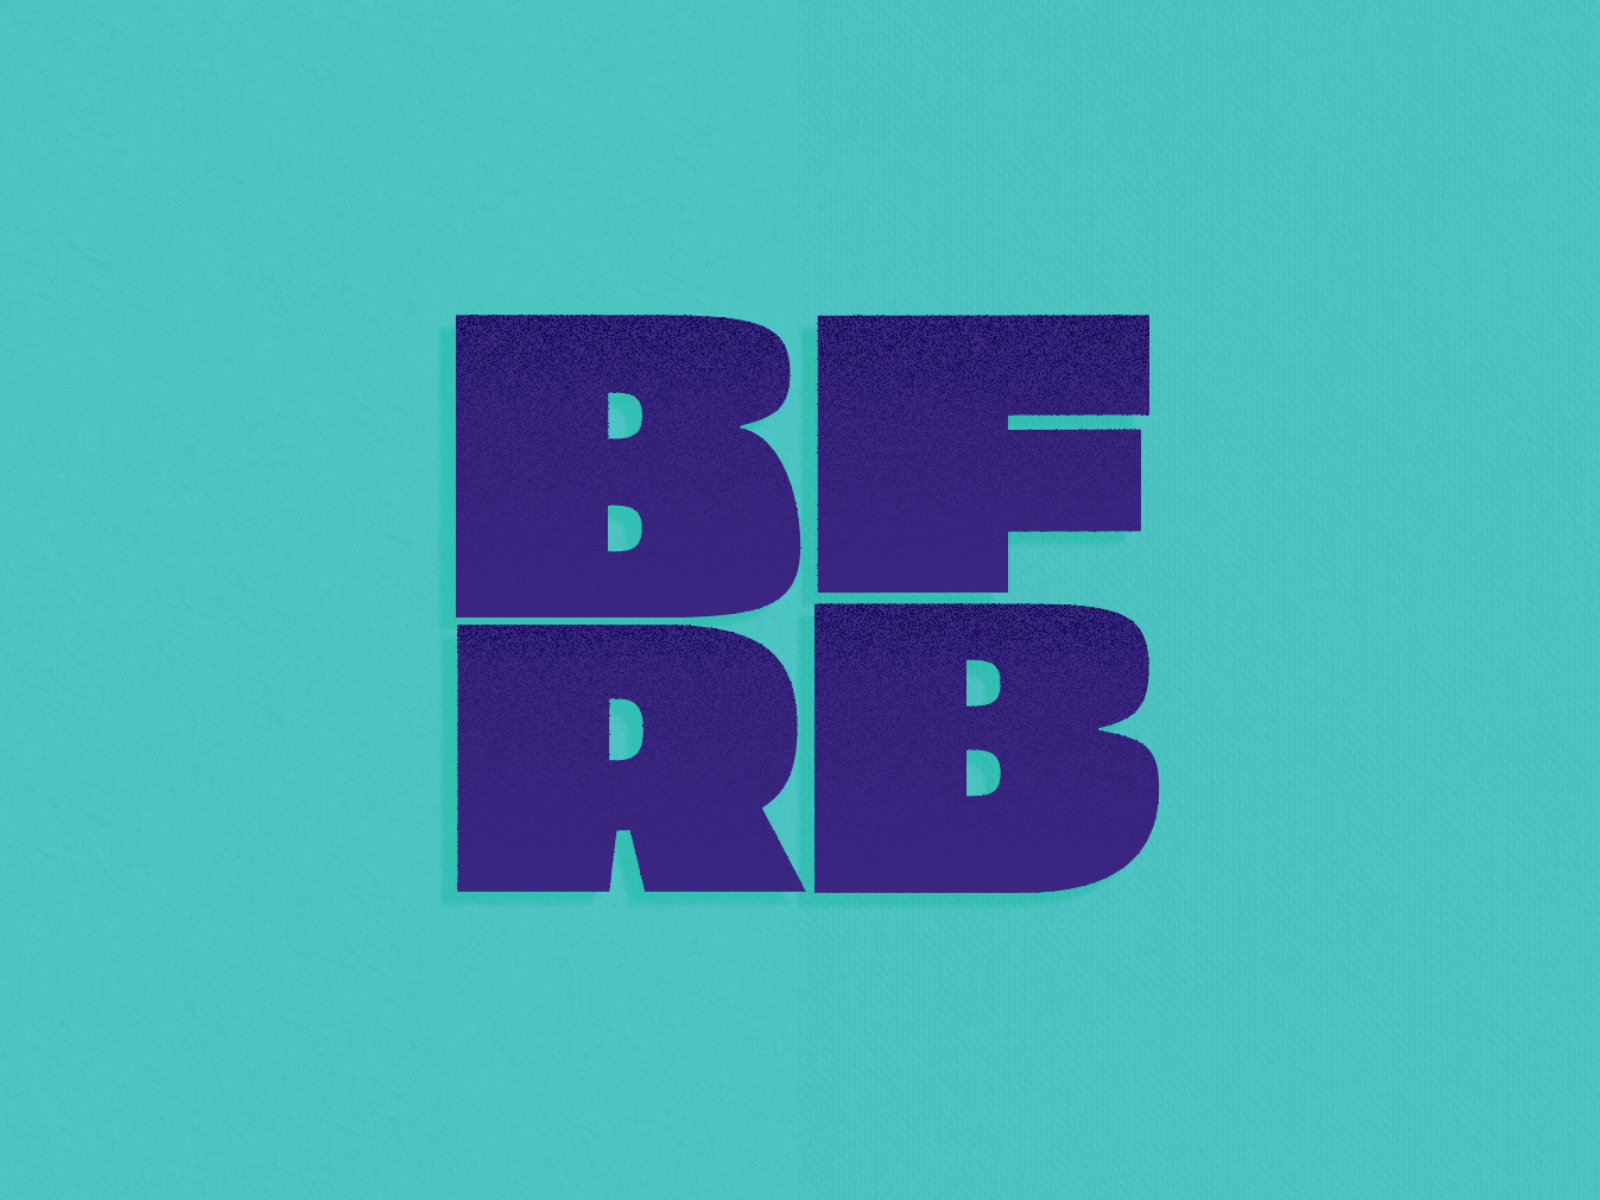 #BFRBWeek aftereffects animation bfrbweek motiongraphics typography vector